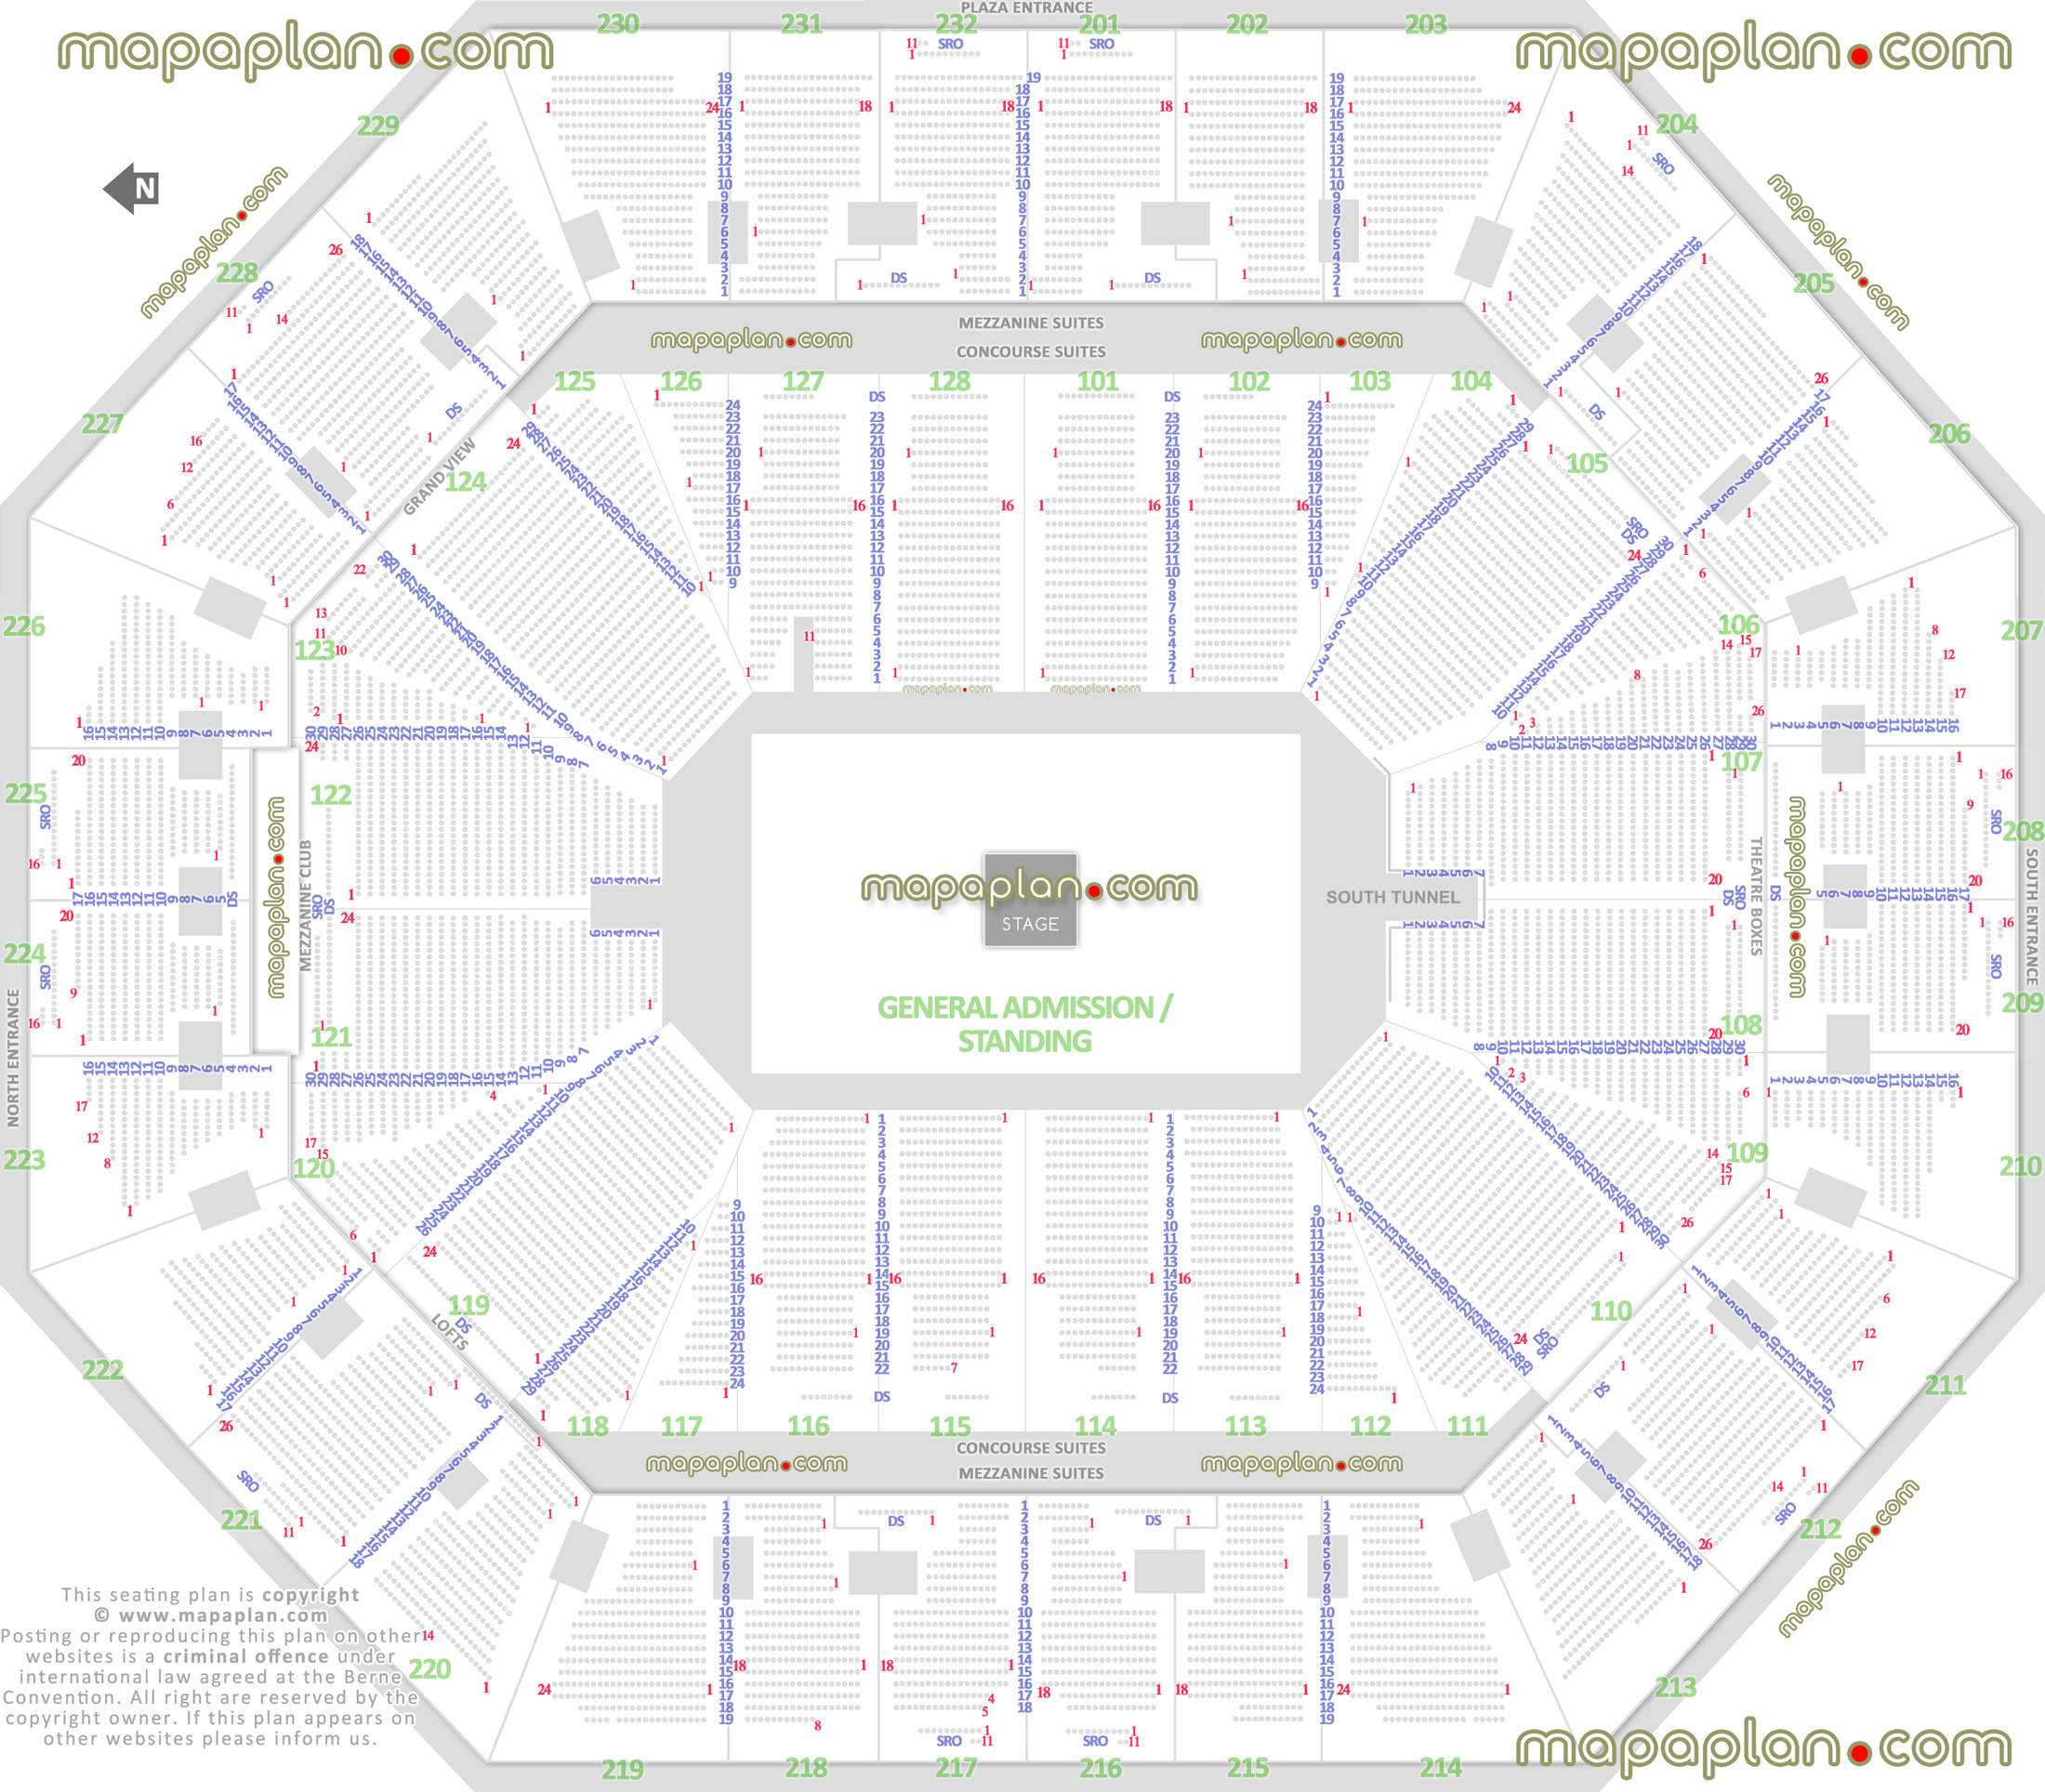 concert stage round 360 degree arrangement how many seats per row detailed fully seated chart setup viewer standing room only sro area ds wheelchair disabled handicap accessible seats arena main entrance gate exits map Oakland Oracle Arena seating chart